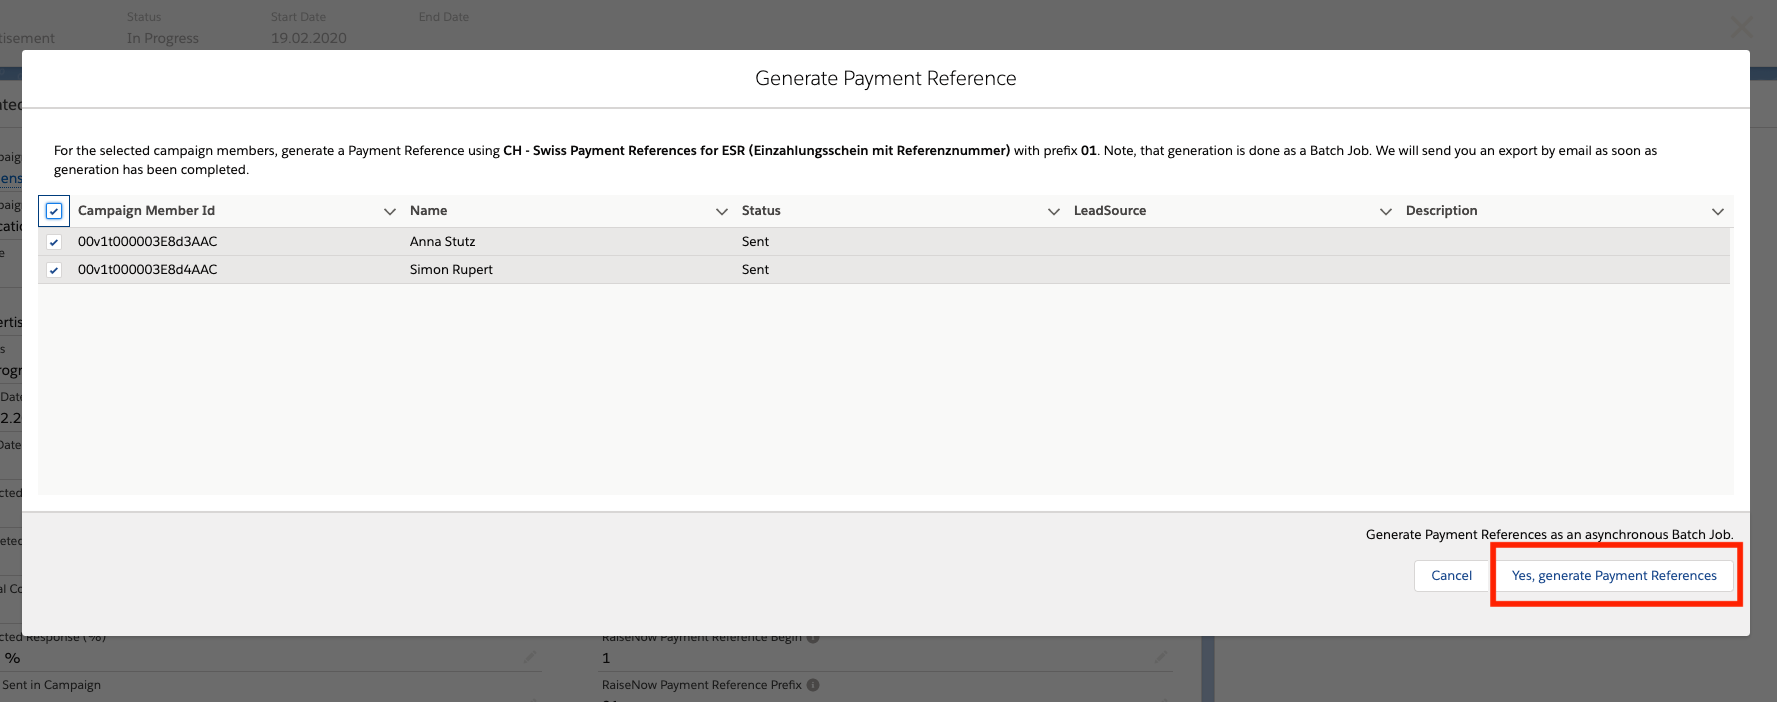 generate-payment-references.png